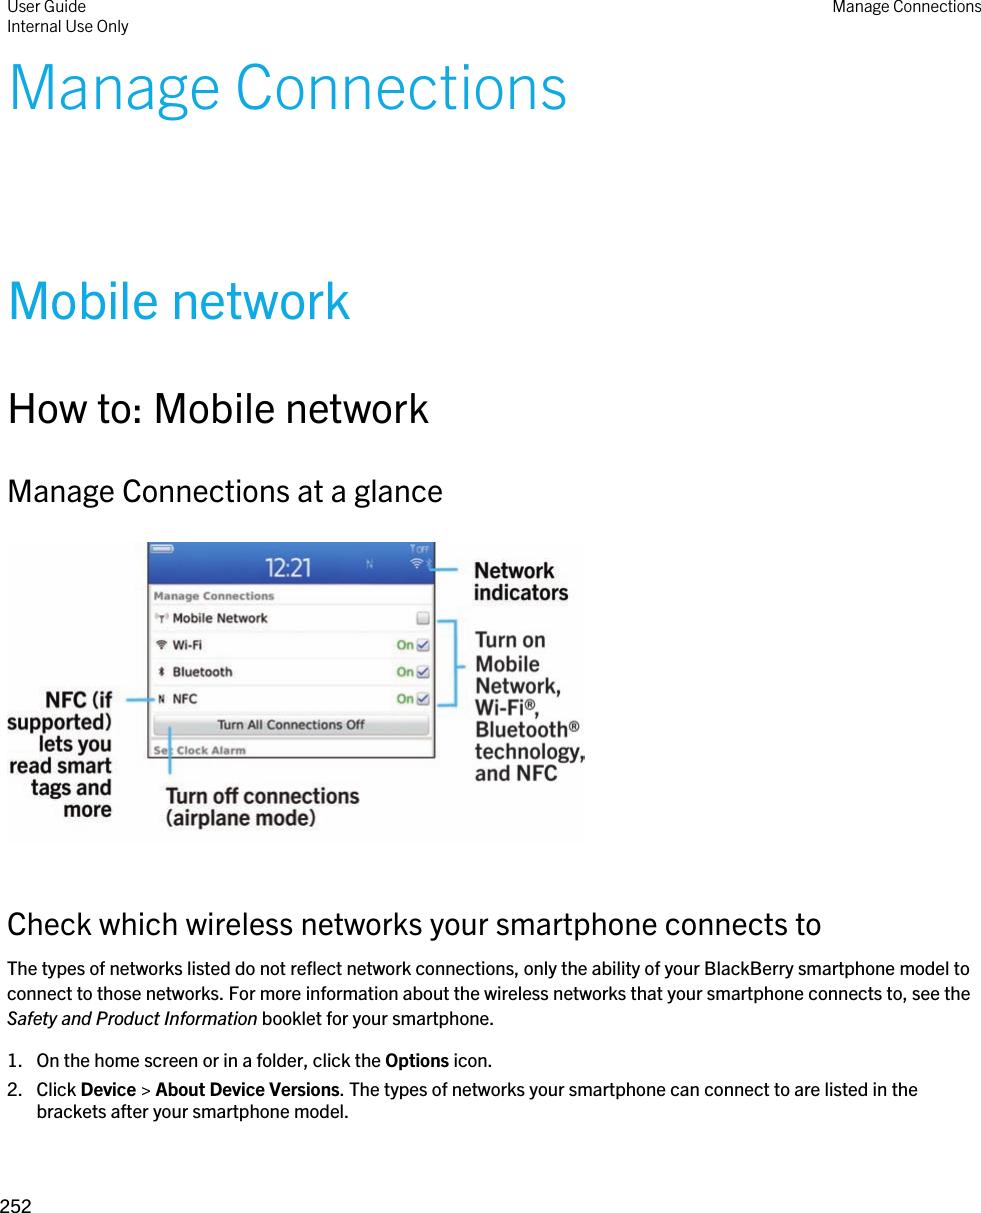 Manage ConnectionsMobile networkHow to: Mobile networkManage Connections at a glance  Check which wireless networks your smartphone connects toThe types of networks listed do not reflect network connections, only the ability of your BlackBerry smartphone model to connect to those networks. For more information about the wireless networks that your smartphone connects to, see the Safety and Product Information booklet for your smartphone.1. On the home screen or in a folder, click the Options icon.2. Click Device &gt; About Device Versions. The types of networks your smartphone can connect to are listed in the brackets after your smartphone model.User GuideInternal Use Only Manage Connections252 